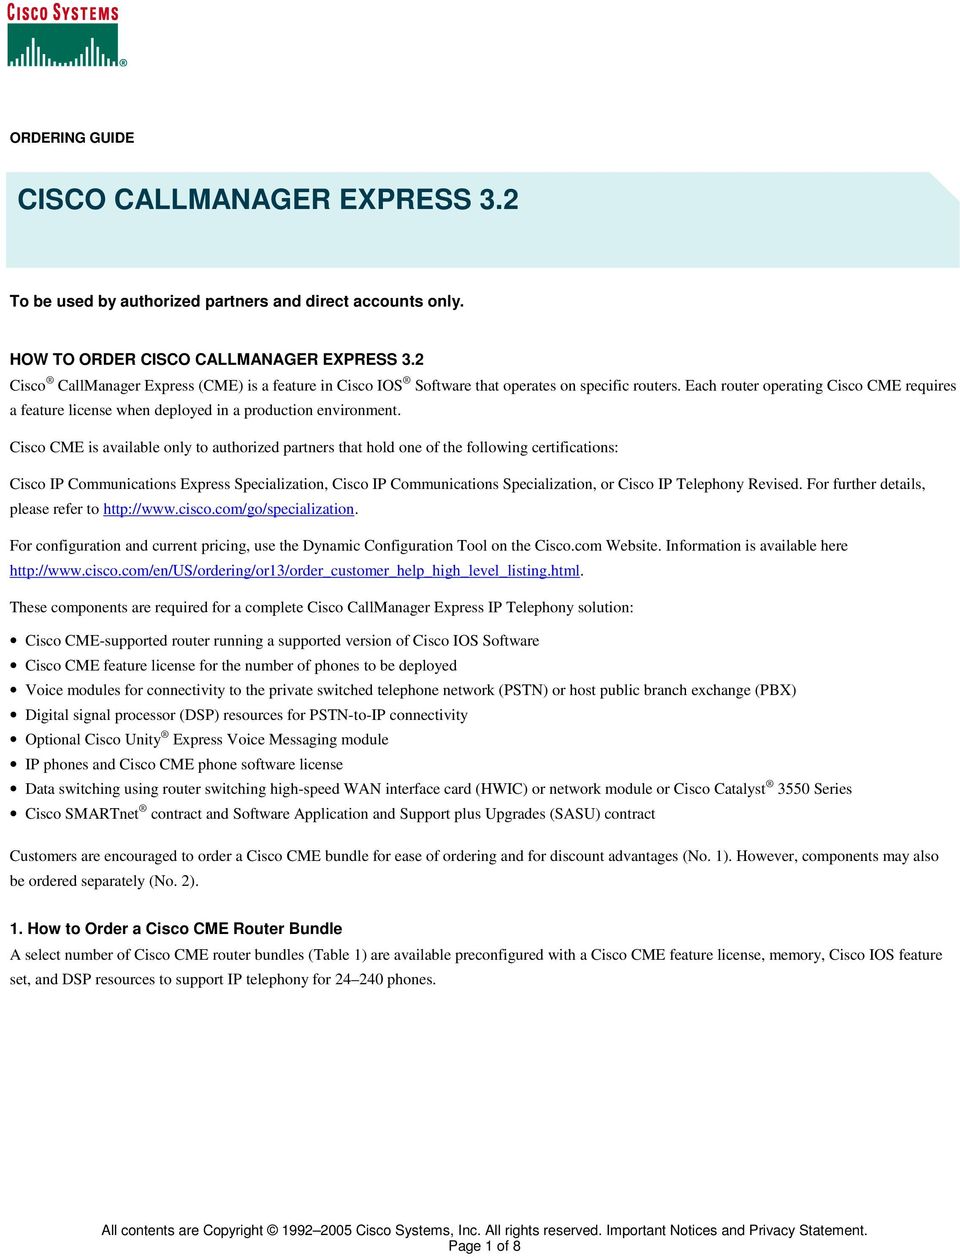 Each router operating Cisco CME requires a feature license when deployed in a production environment.